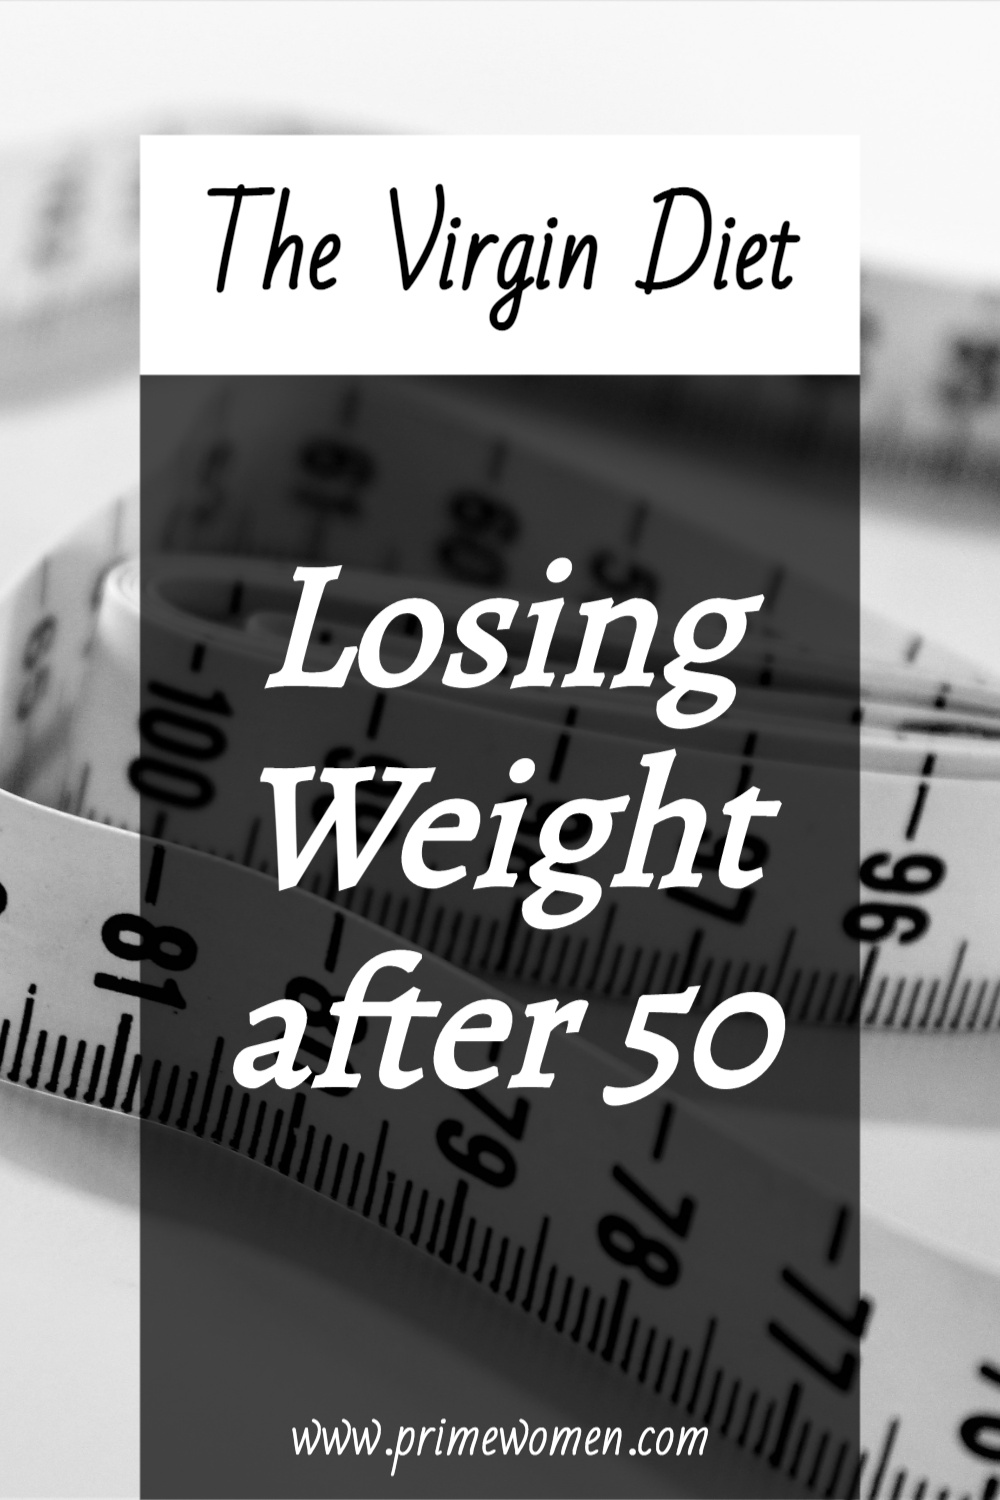 Losing Weight After 50 on The Virgin Diet